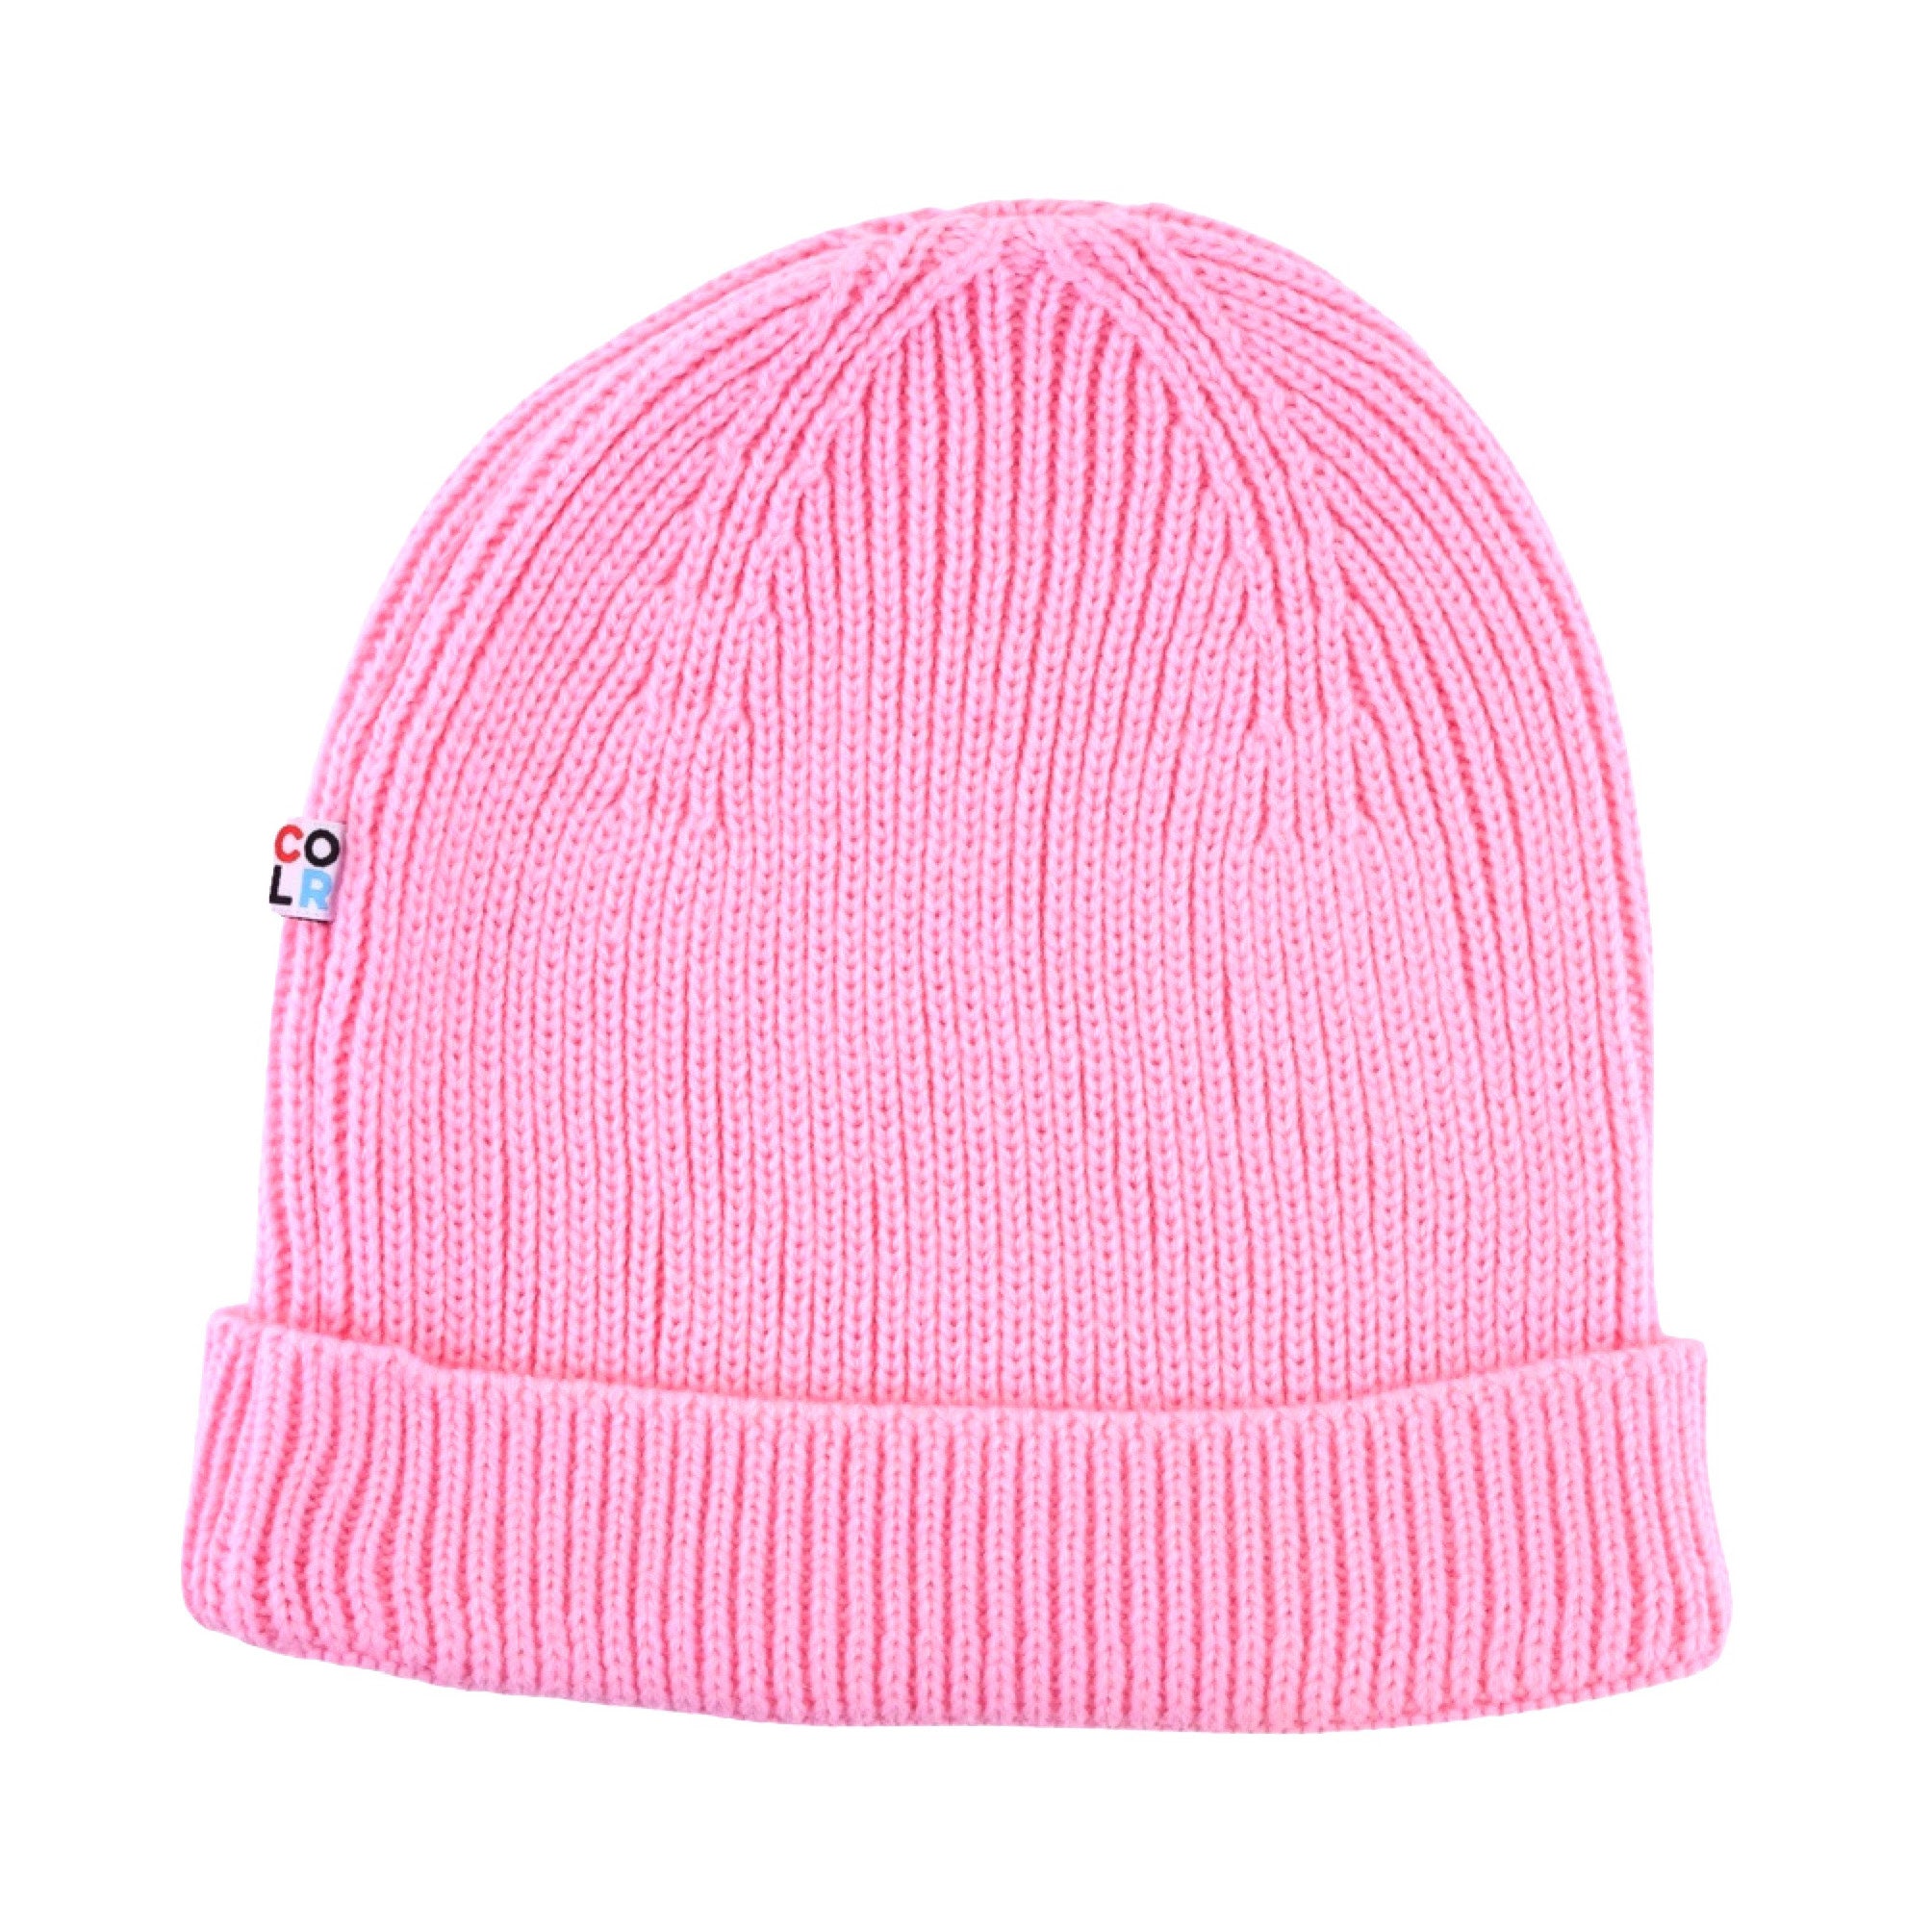 COLR by uLace Beanie - Cotton Candy